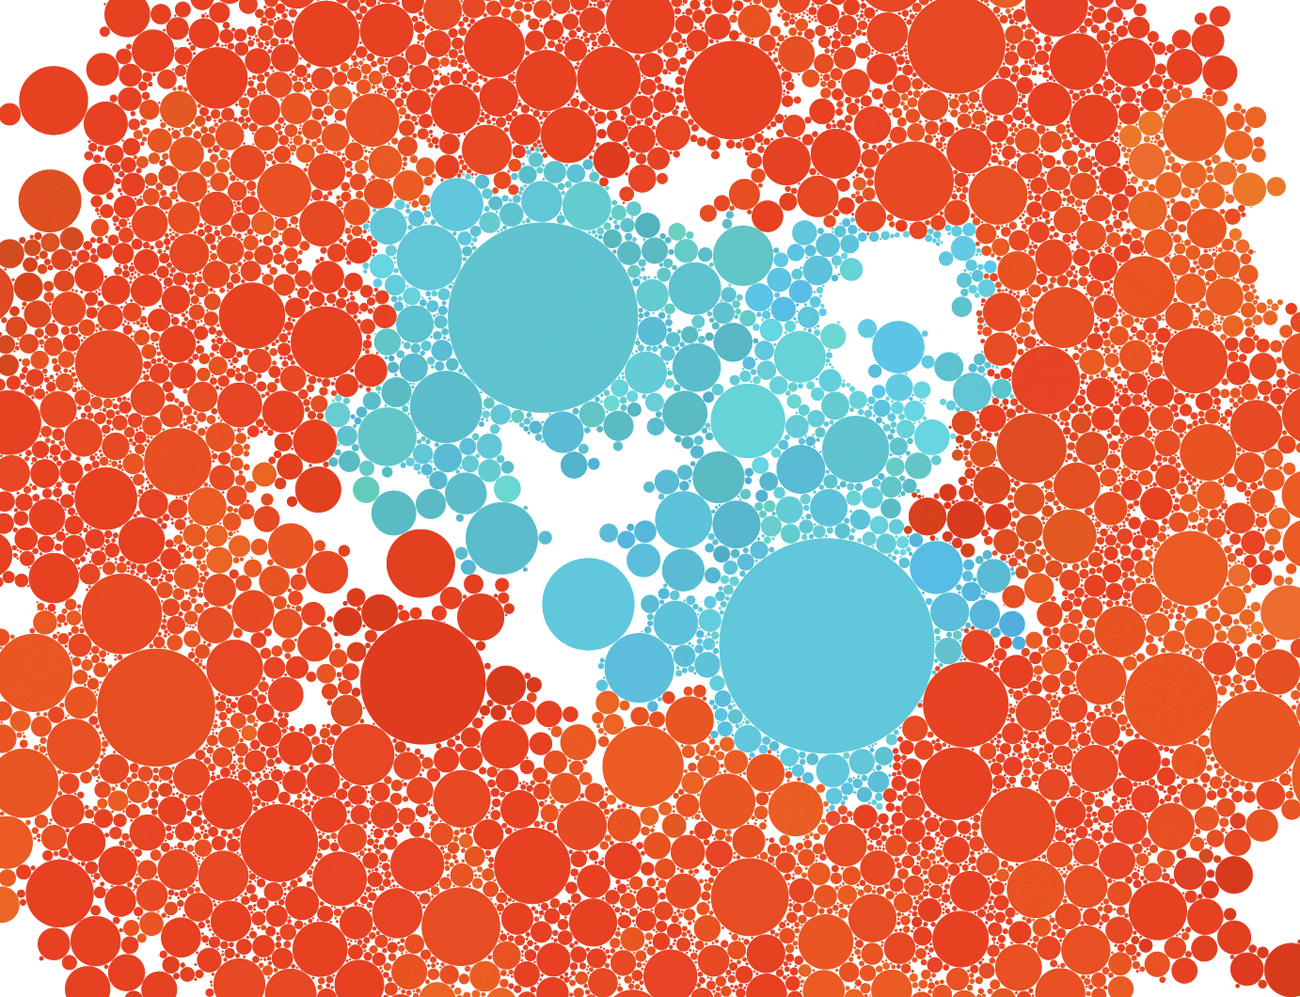 Cell Cluster 3 – Orange and Blue